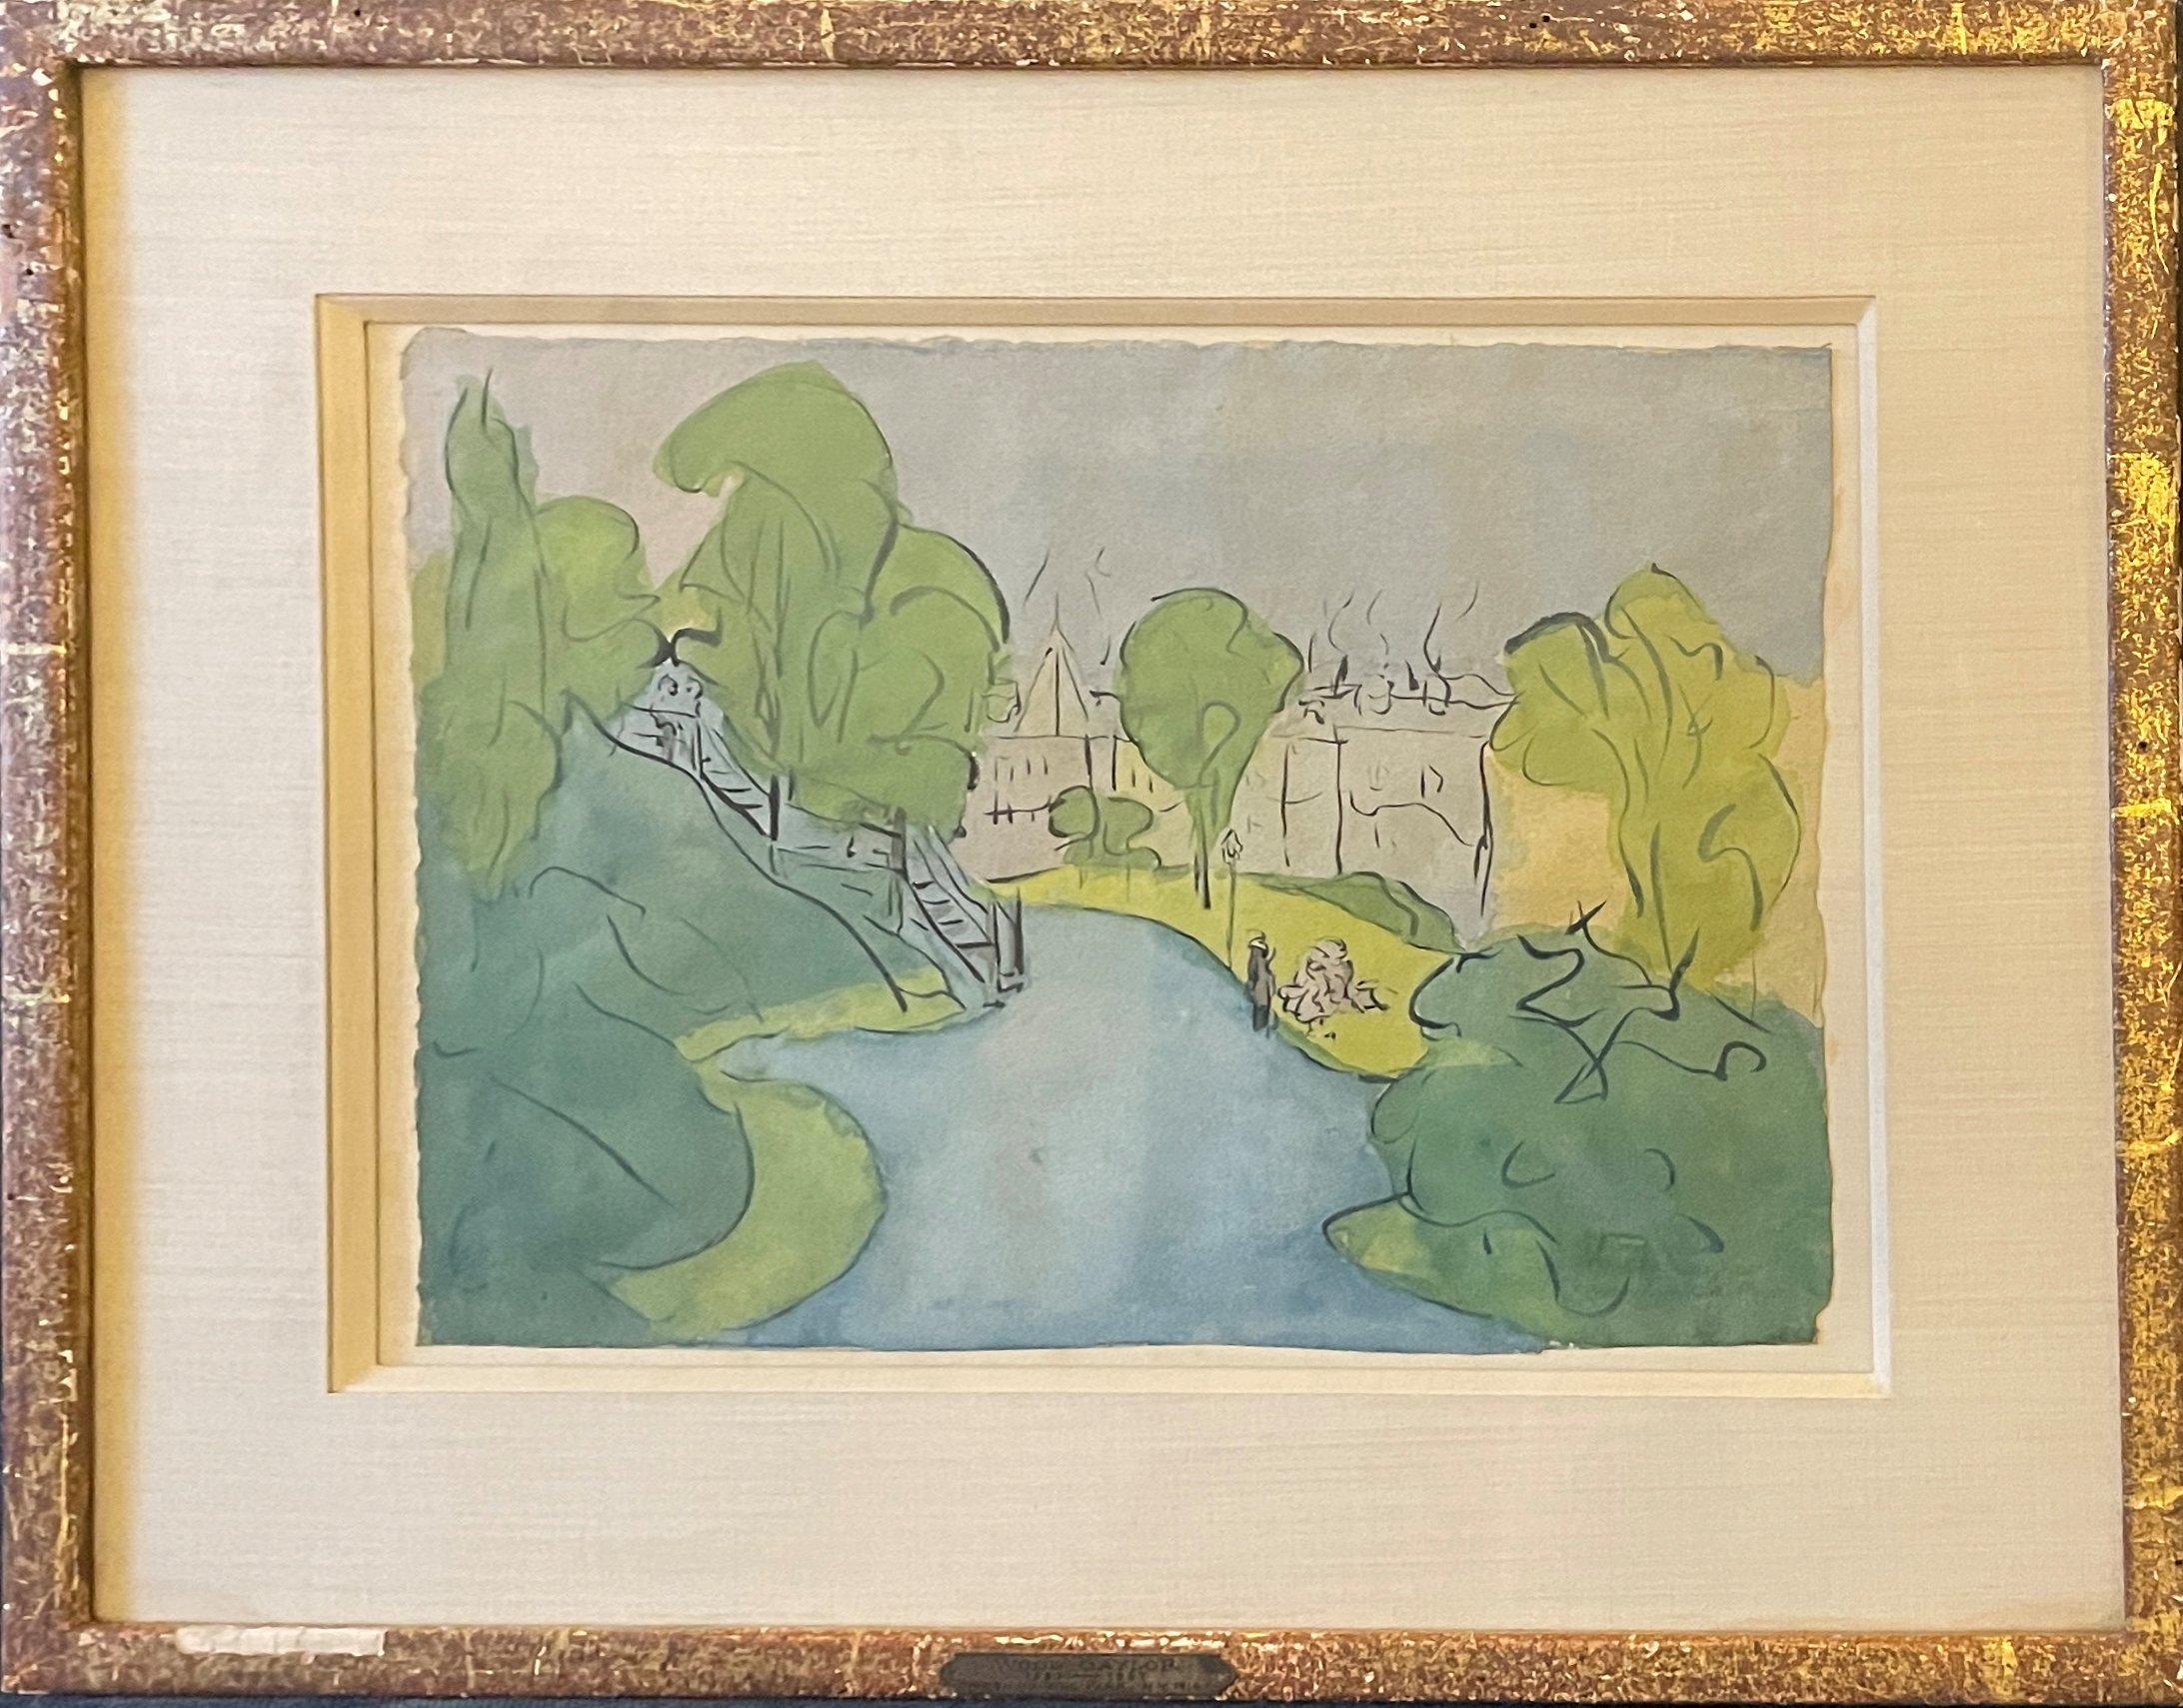 Wood Gaylor (1883 - 1957)
Morningside Park, New York City, 1918
Watercolor on paper
9 1/2 x 12 inches
Signed, titled and dated lower right

Provenance:
Private Collection, Cohoes, New York

Wood Gaylor (1884–1957) was an American artist known for